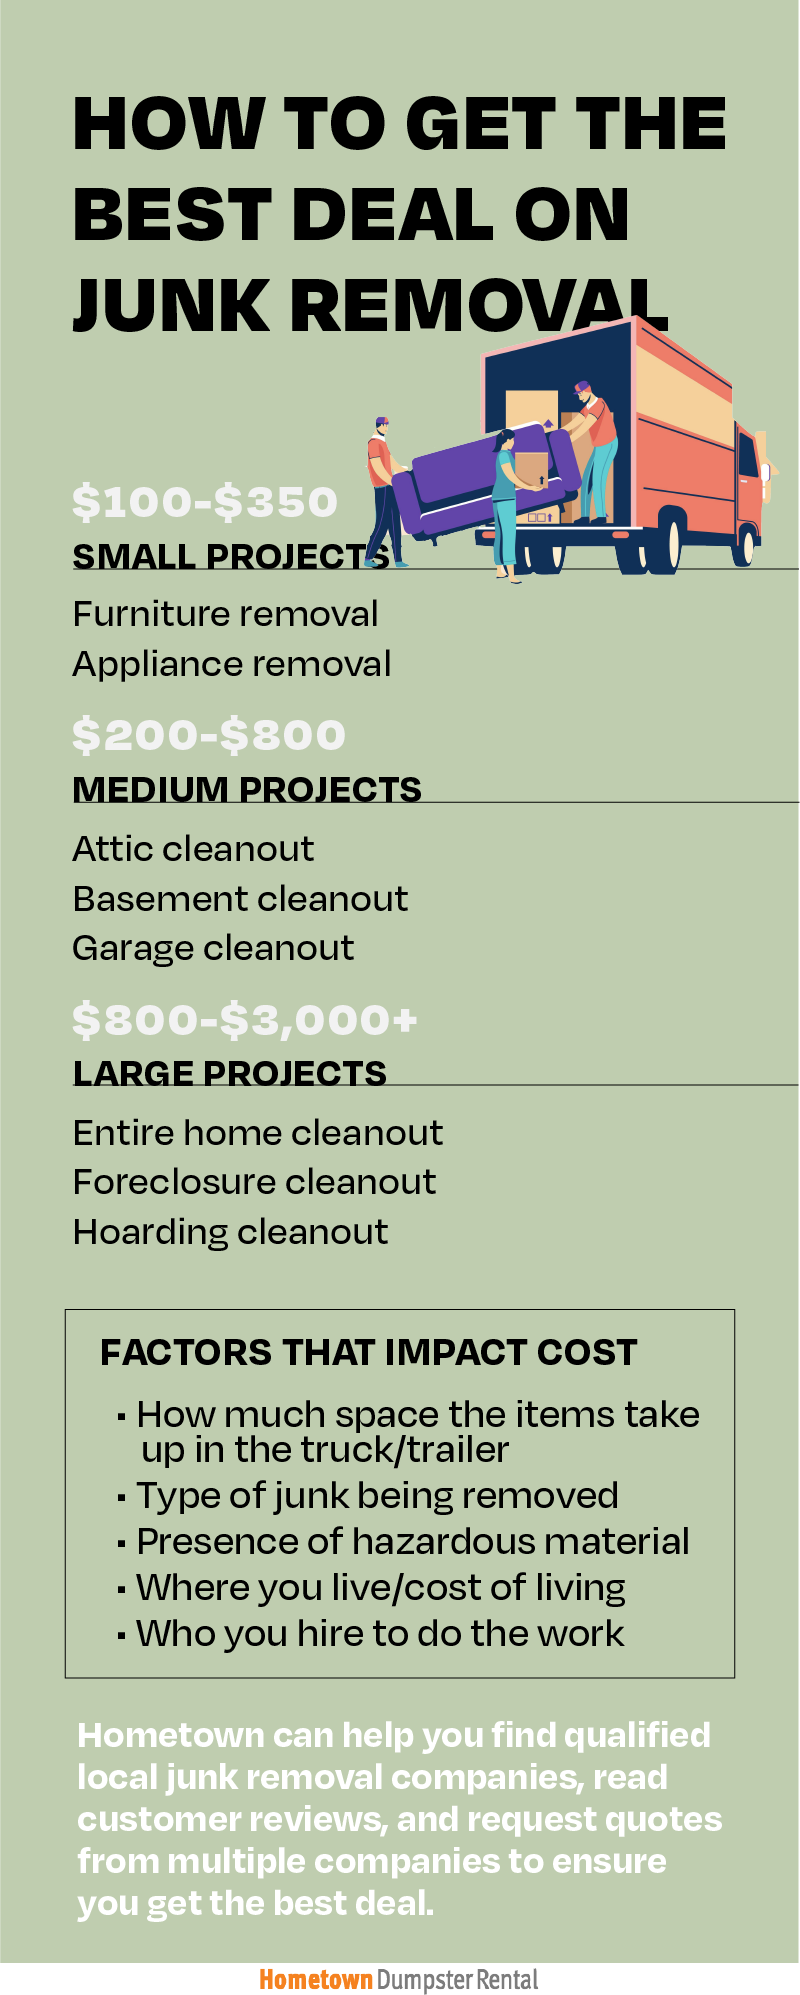 how to get the best deal on junk removal infographic